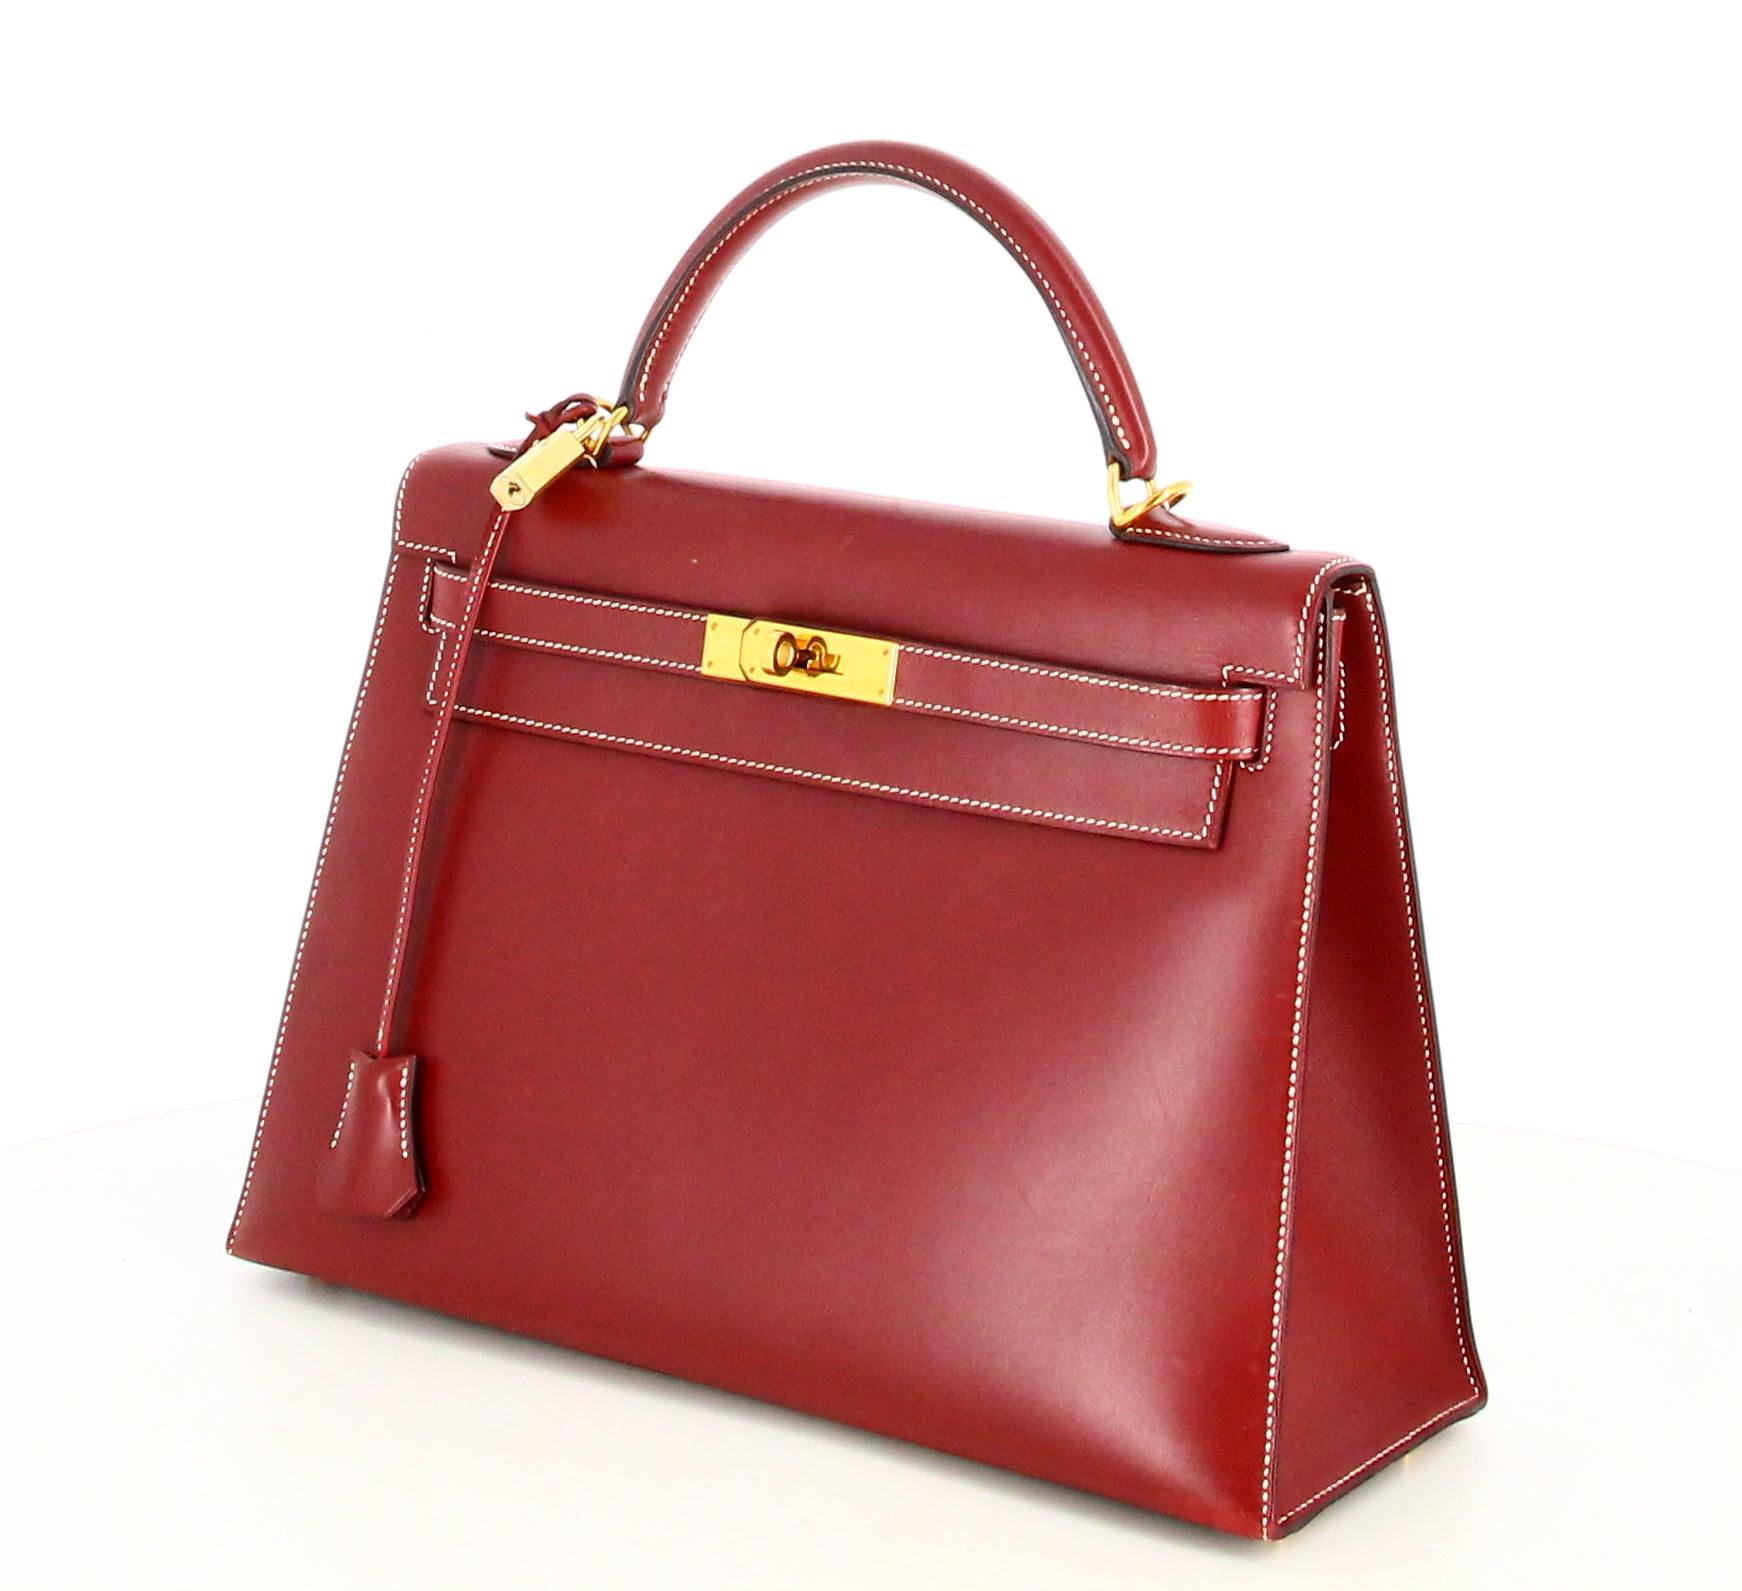 Red 2000 Hermes kelly Sellier 32 in burgundy box leather